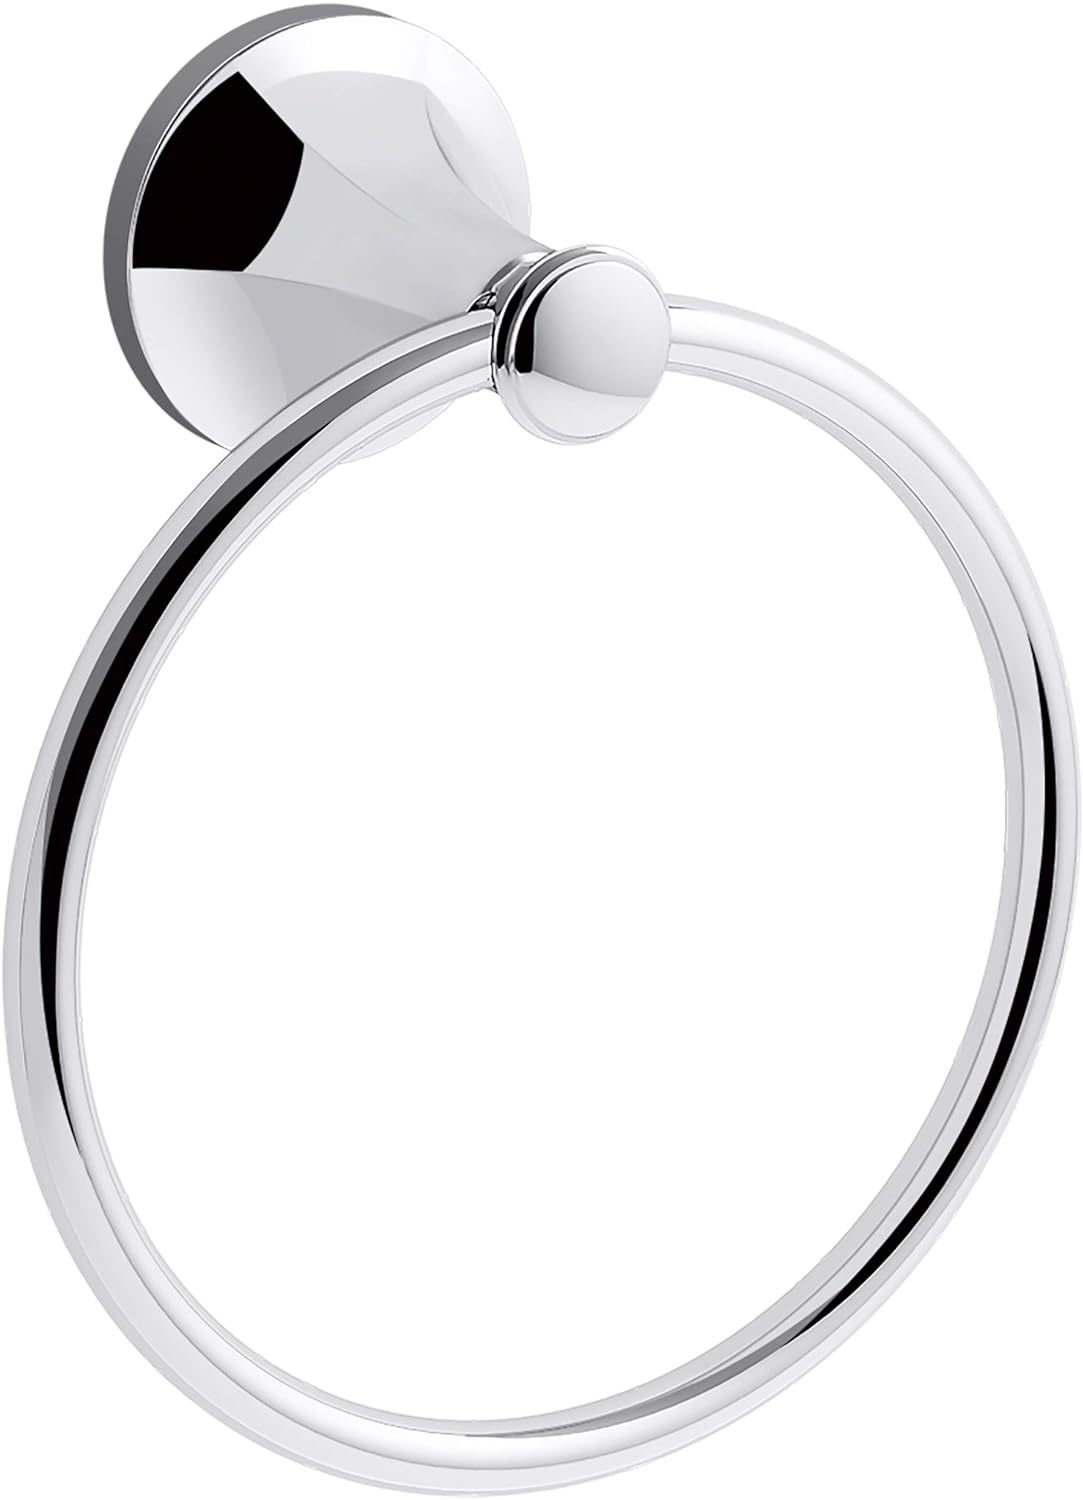 Primary image for Kohler 26511-CP Refined Towel Ring -  Polished Chrome